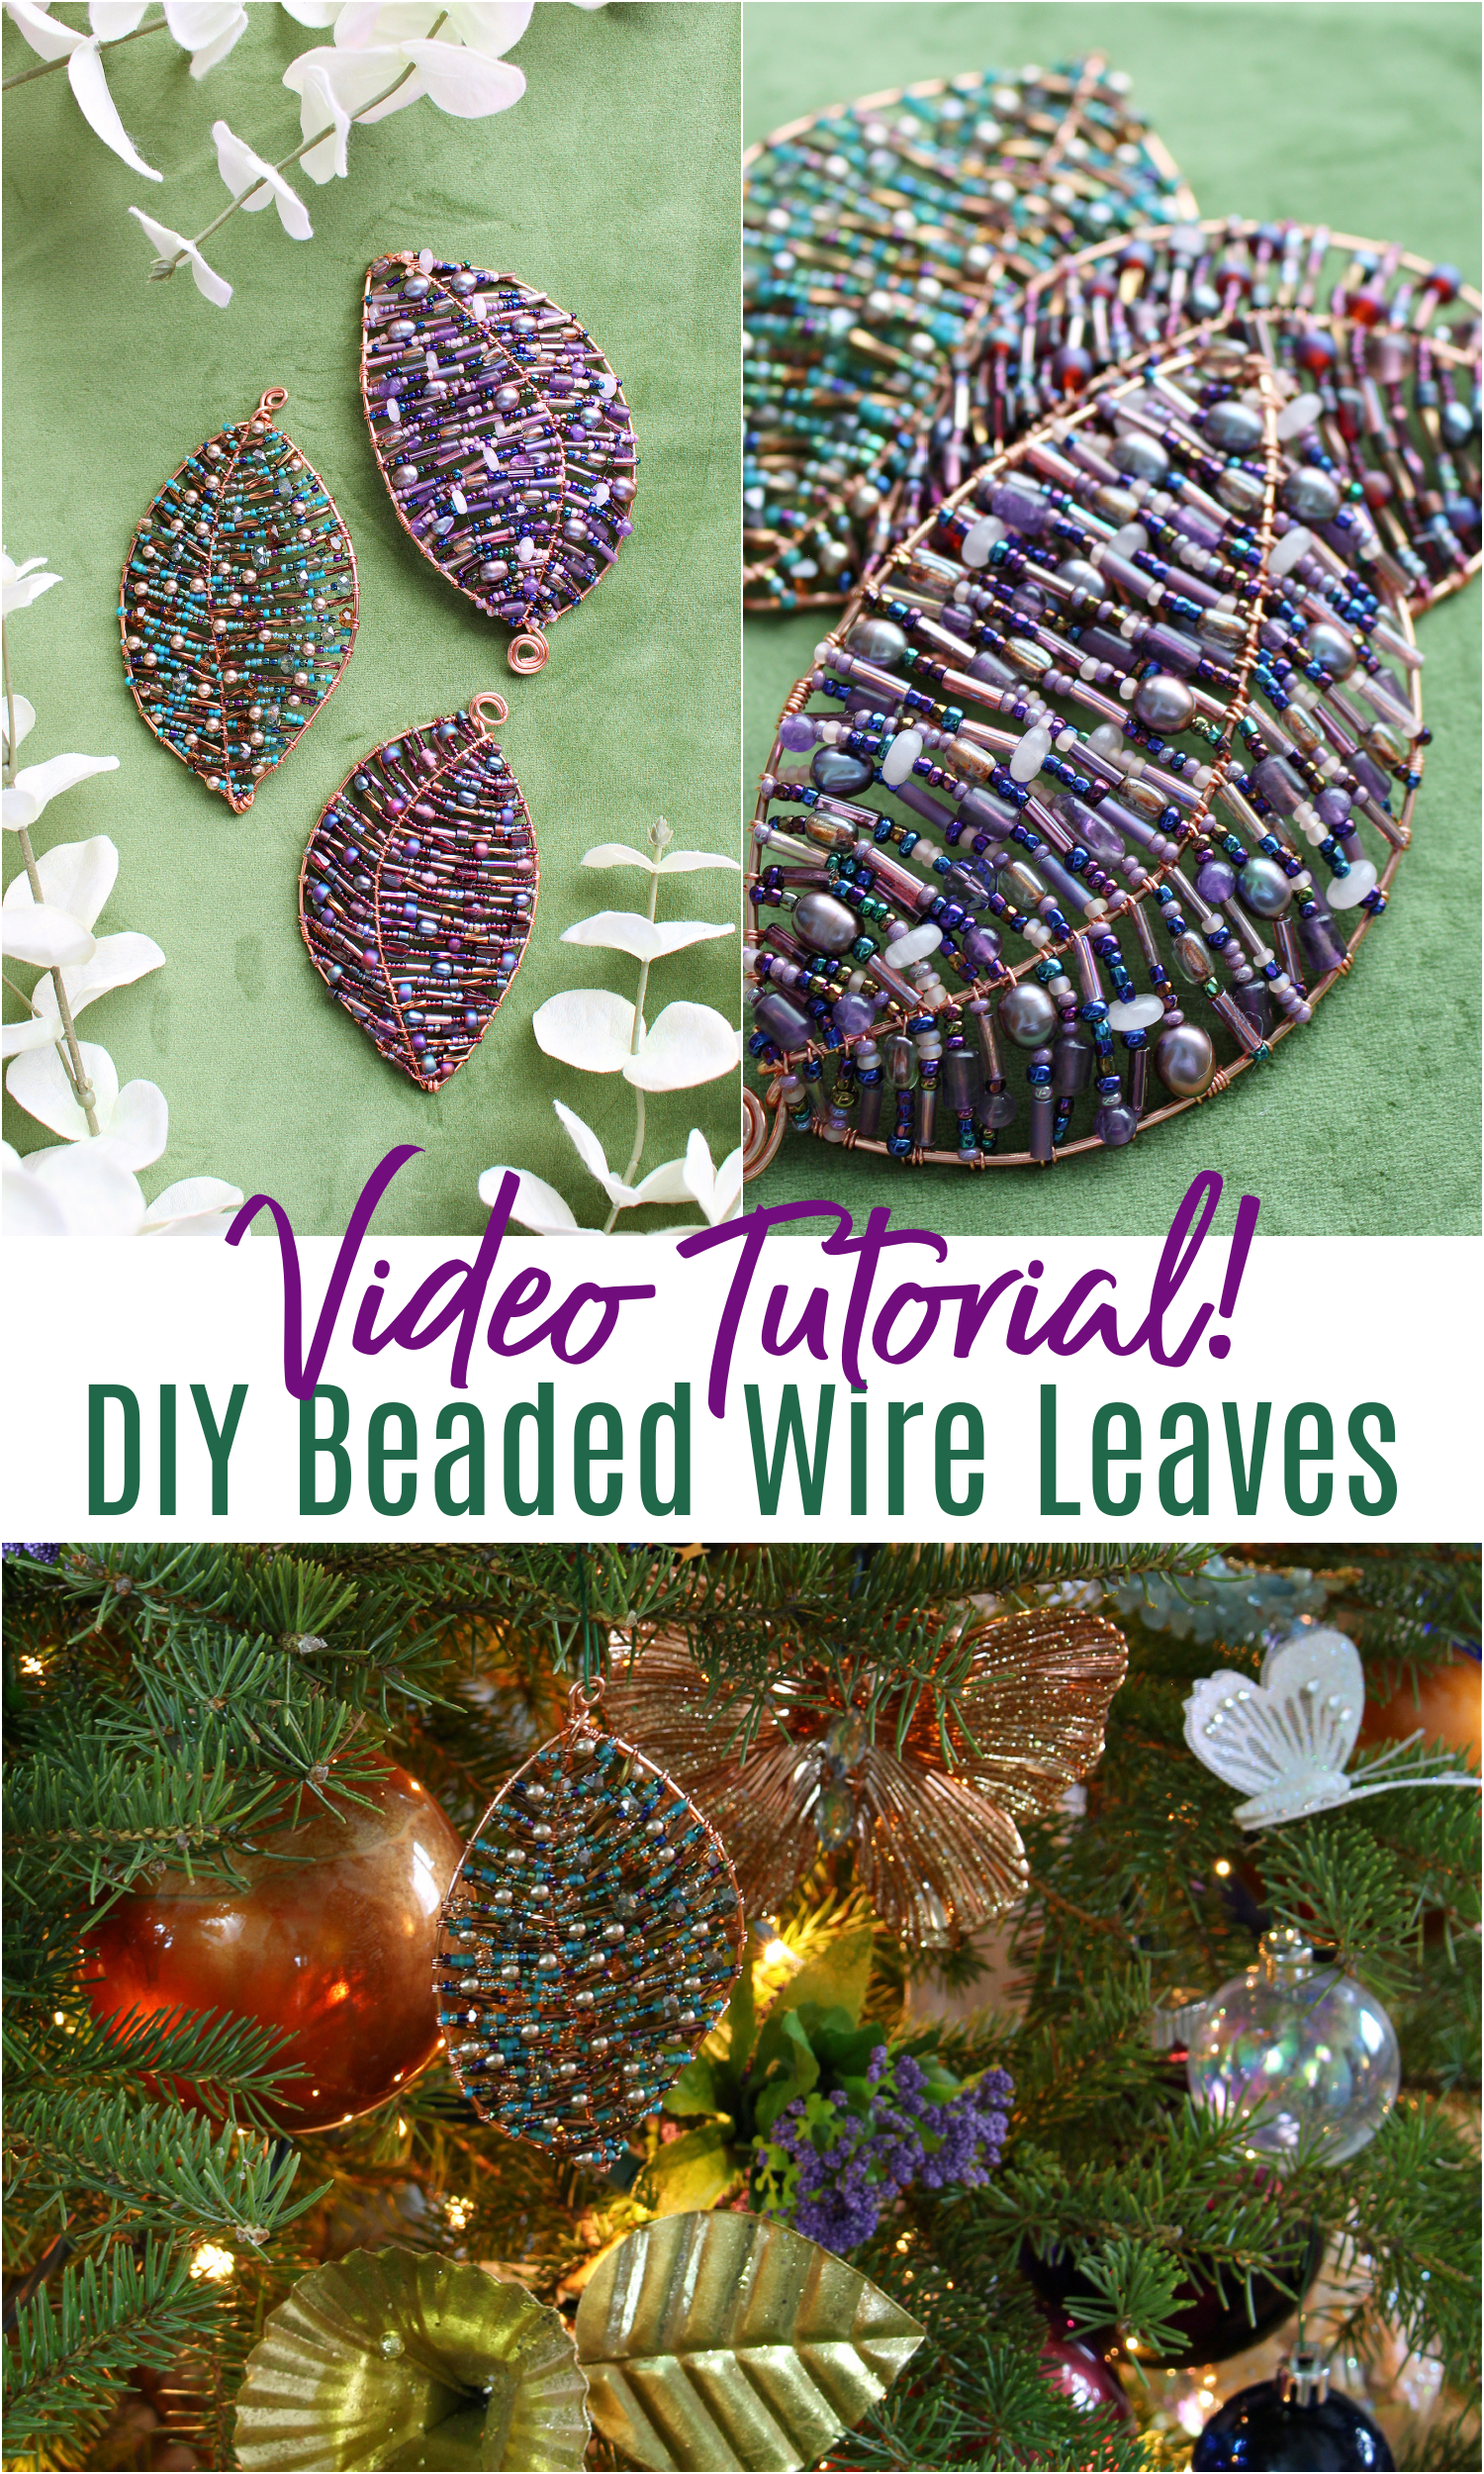 Video Tutorial: How to Make DIY Beaded Wire Leaves